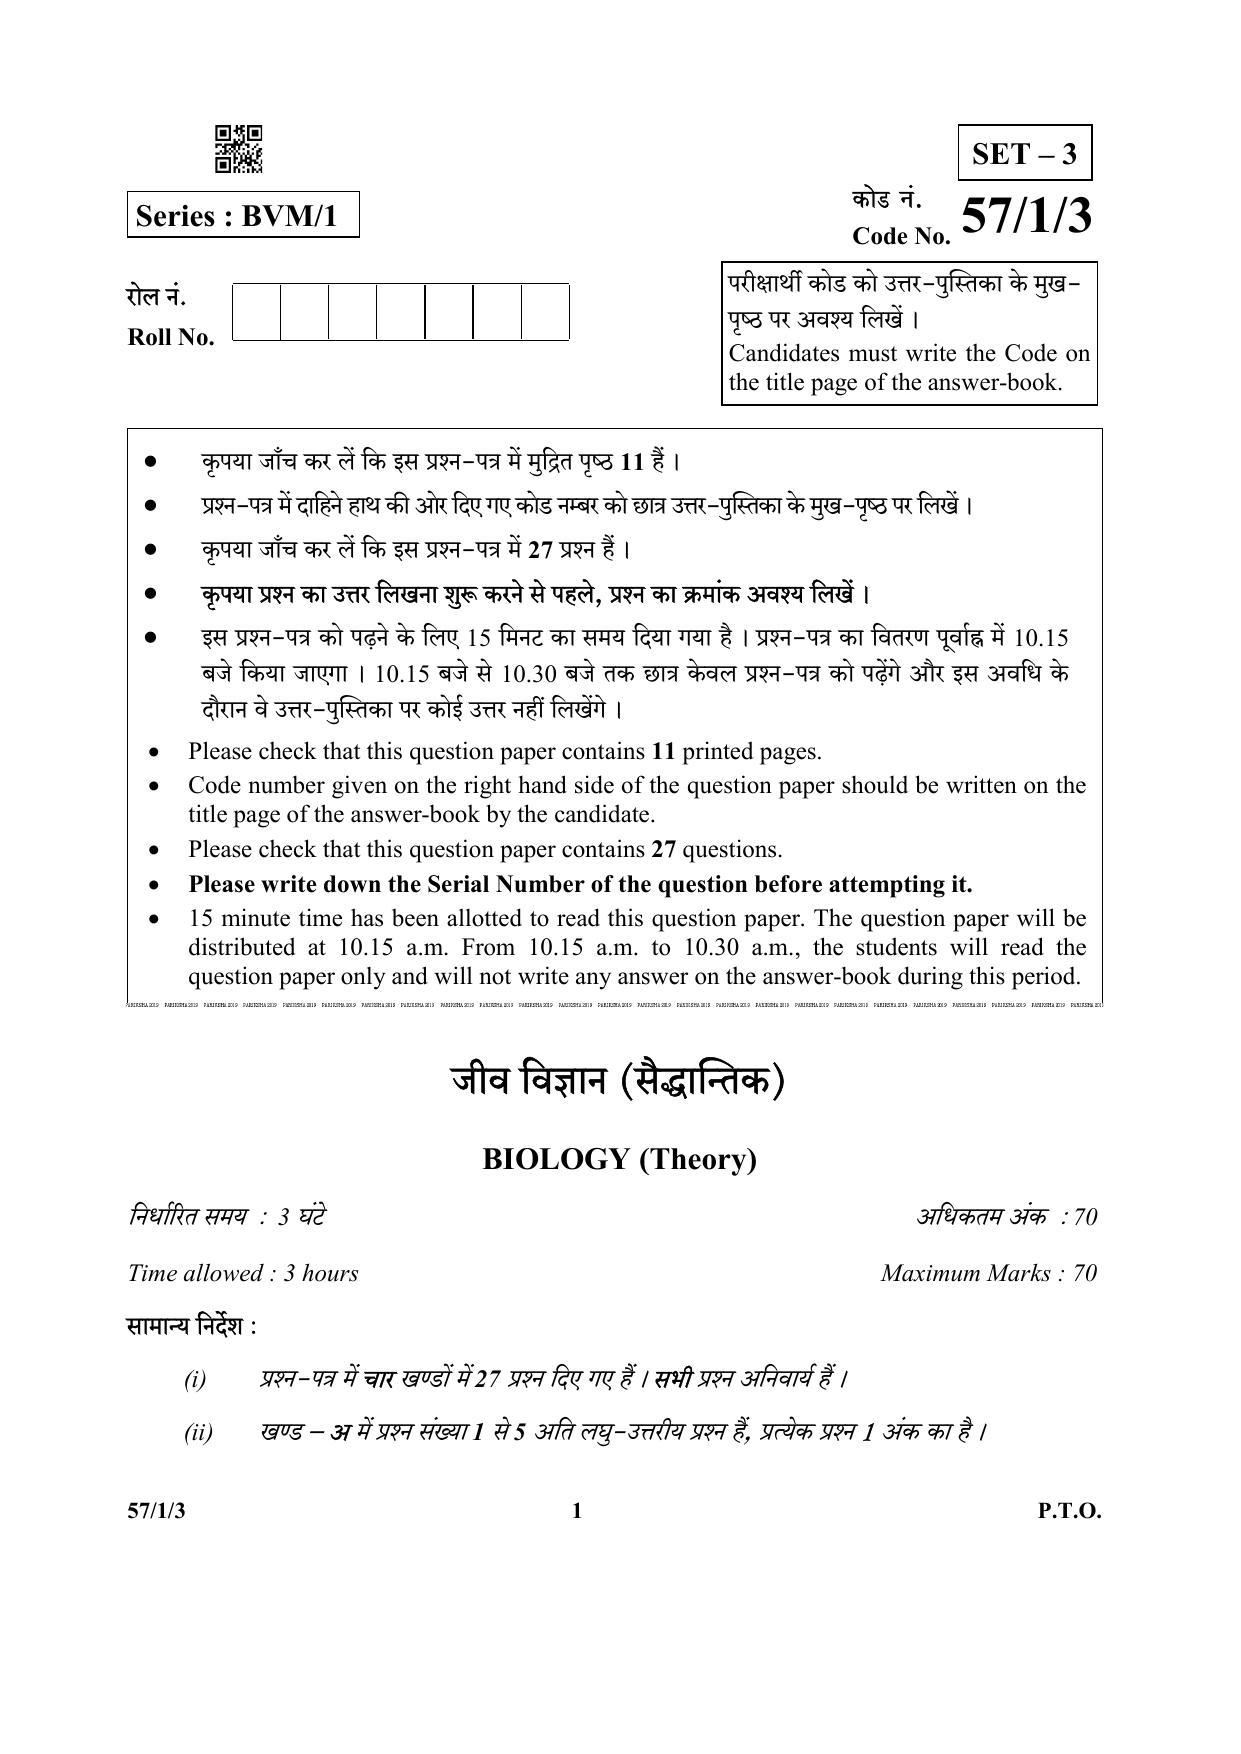 CBSE Class 12 57-3 (Biology) 2019 Question Paper - Page 1